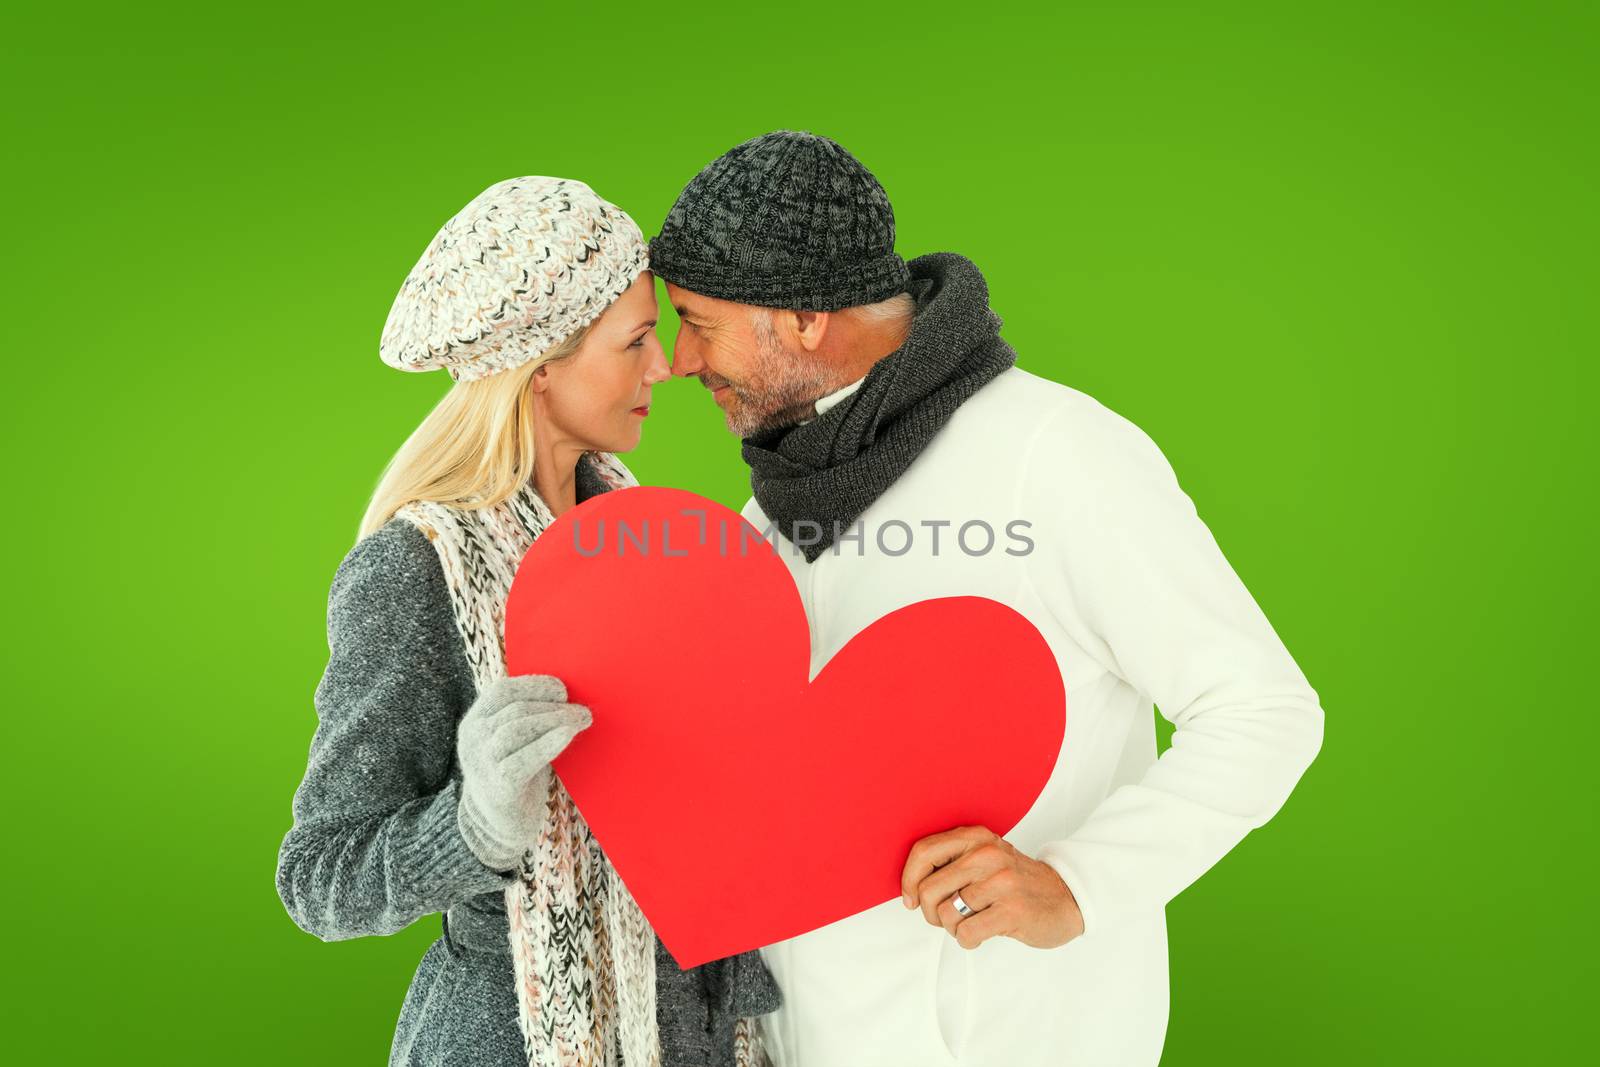 Smiling couple in winter fashion posing with heart shape against green vignette